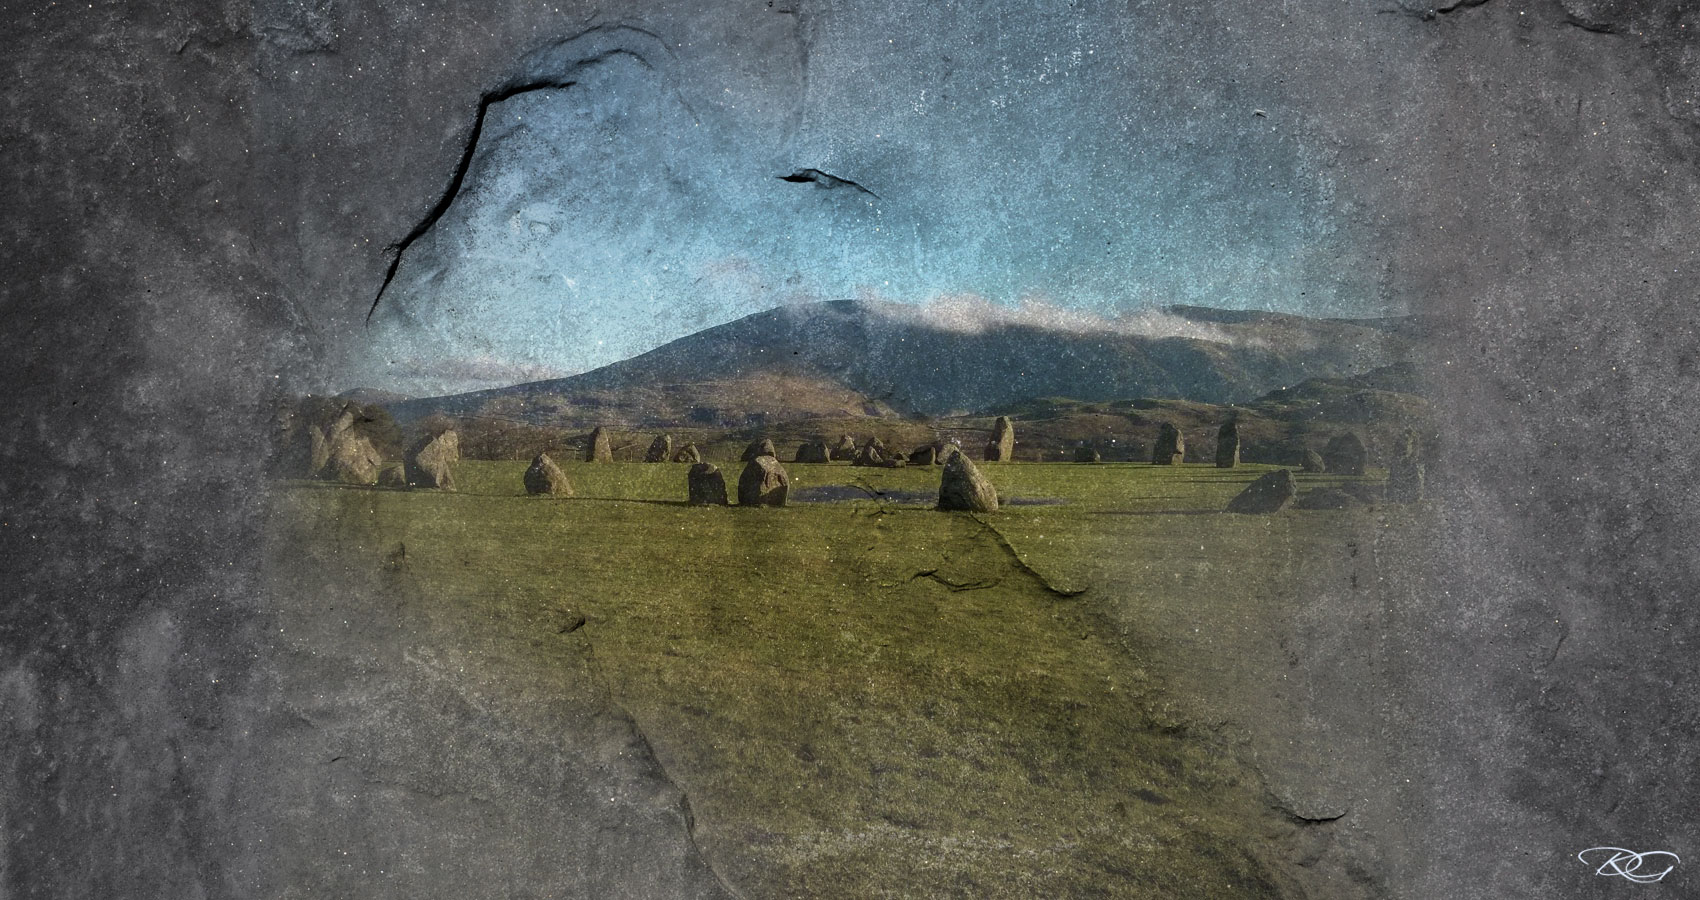 Standing Stones written by Ricky Hawthorne at Spillwords.com